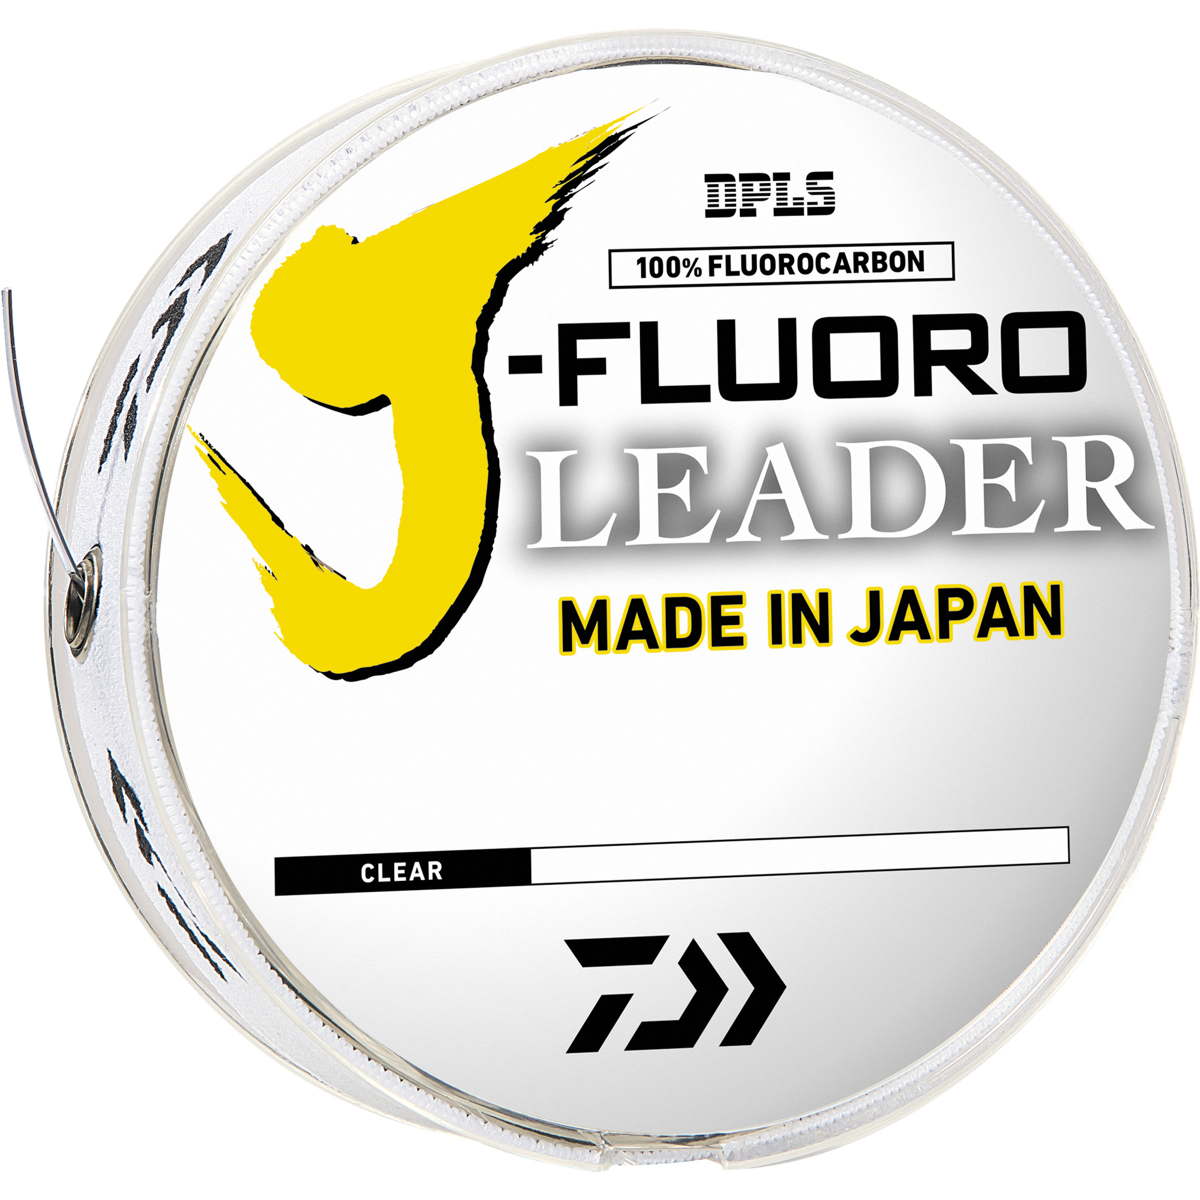 Photo of Daiwa J-Fluoro Leader for sale at United Tackle Shops.